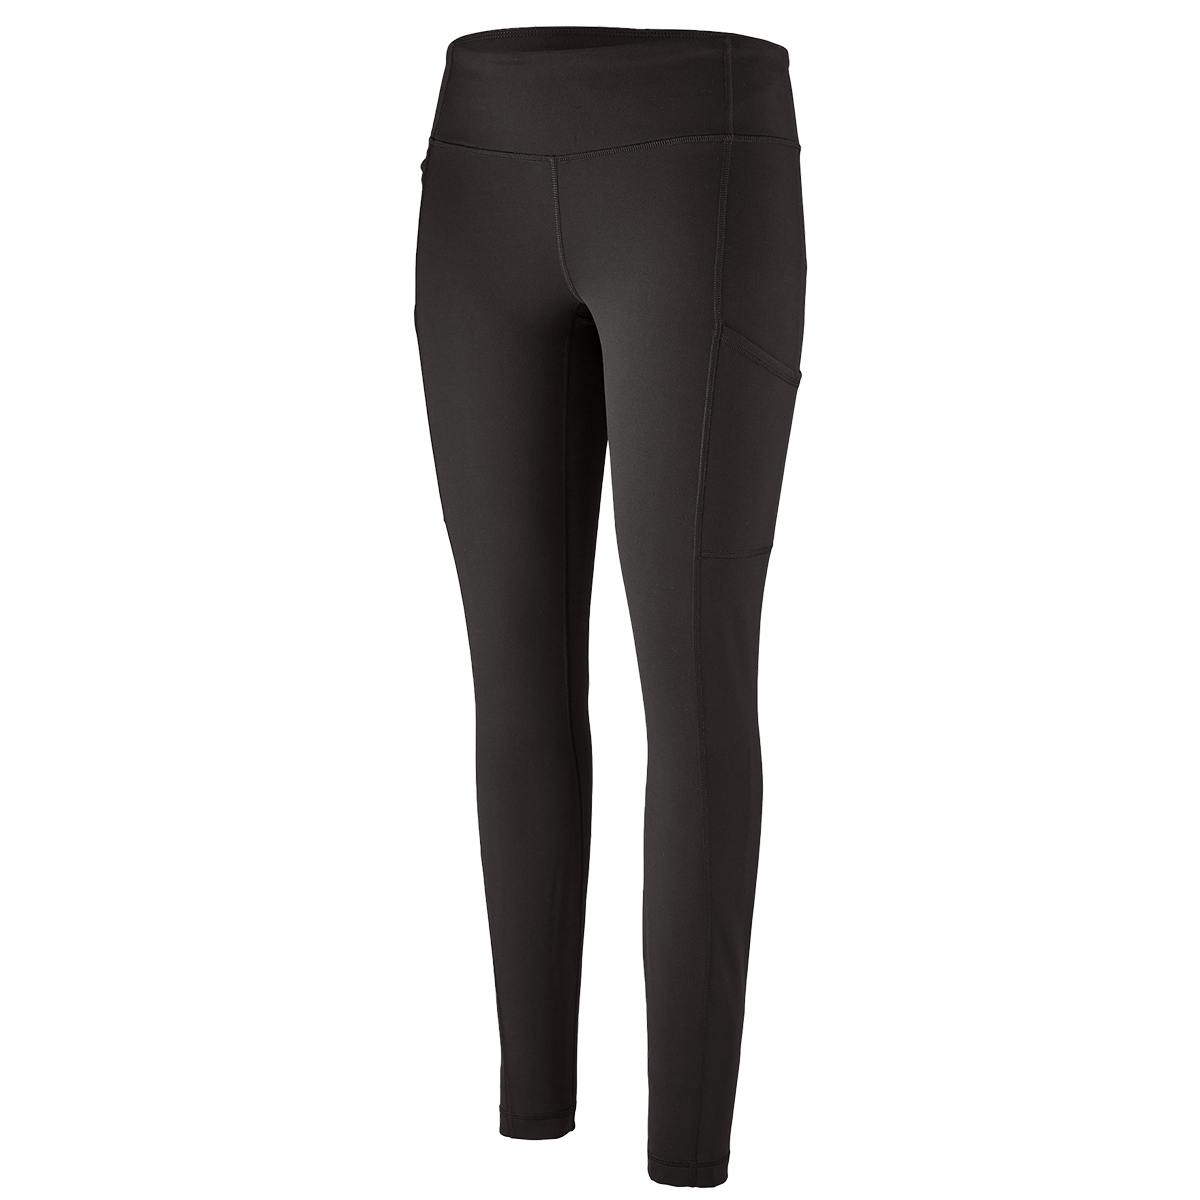 Women's Pack Out Tights – Sports Basement